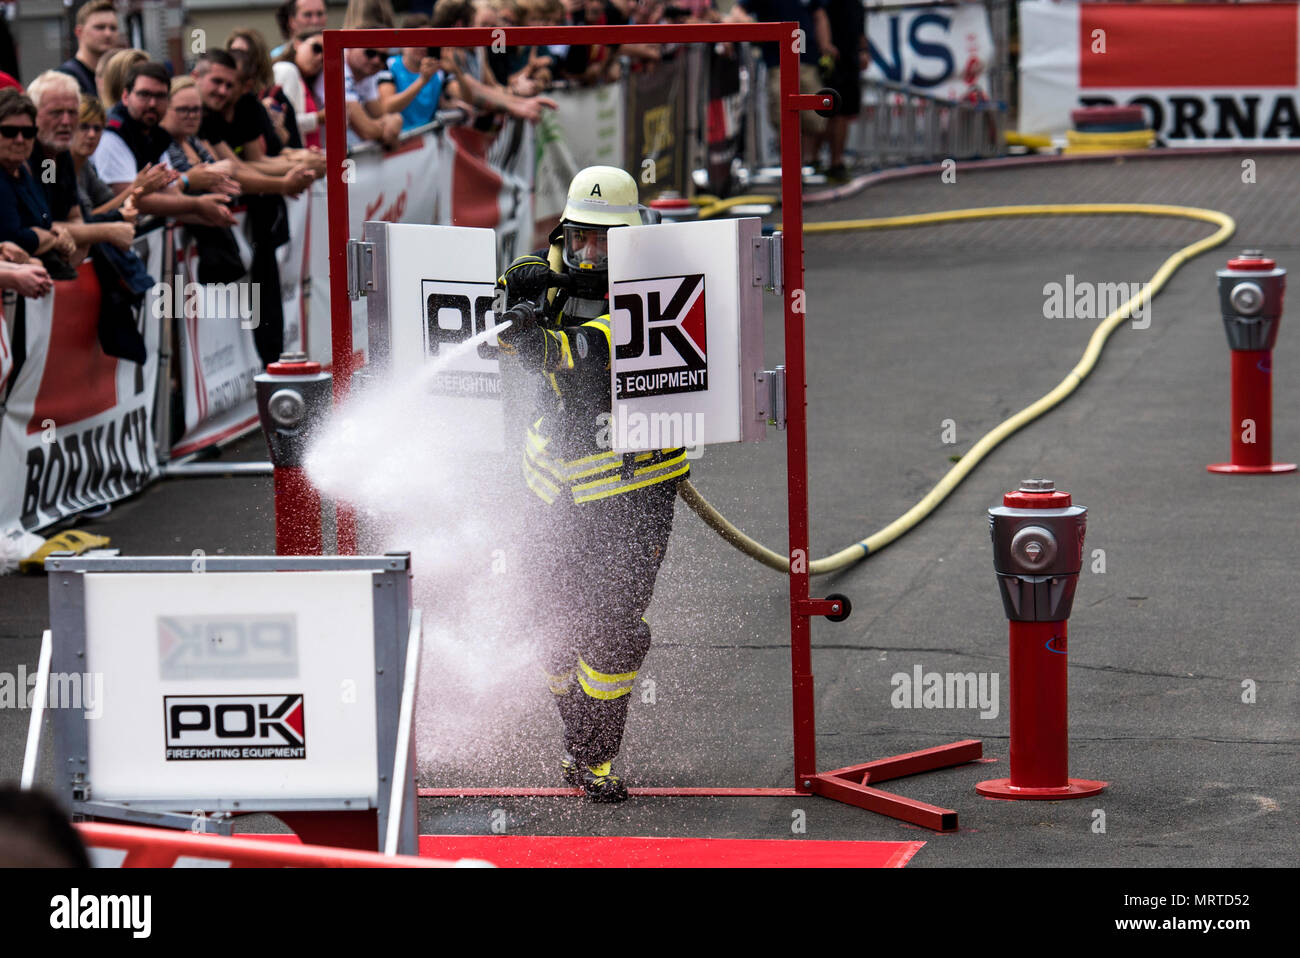 A german firefighter uses a hose to knock down a target during the 4th  annual Mosel Firefighter Combat Challenge in Ediger-Eller, Germany, June  30, 2017. Competitors from 12 countries raced head-to-head as